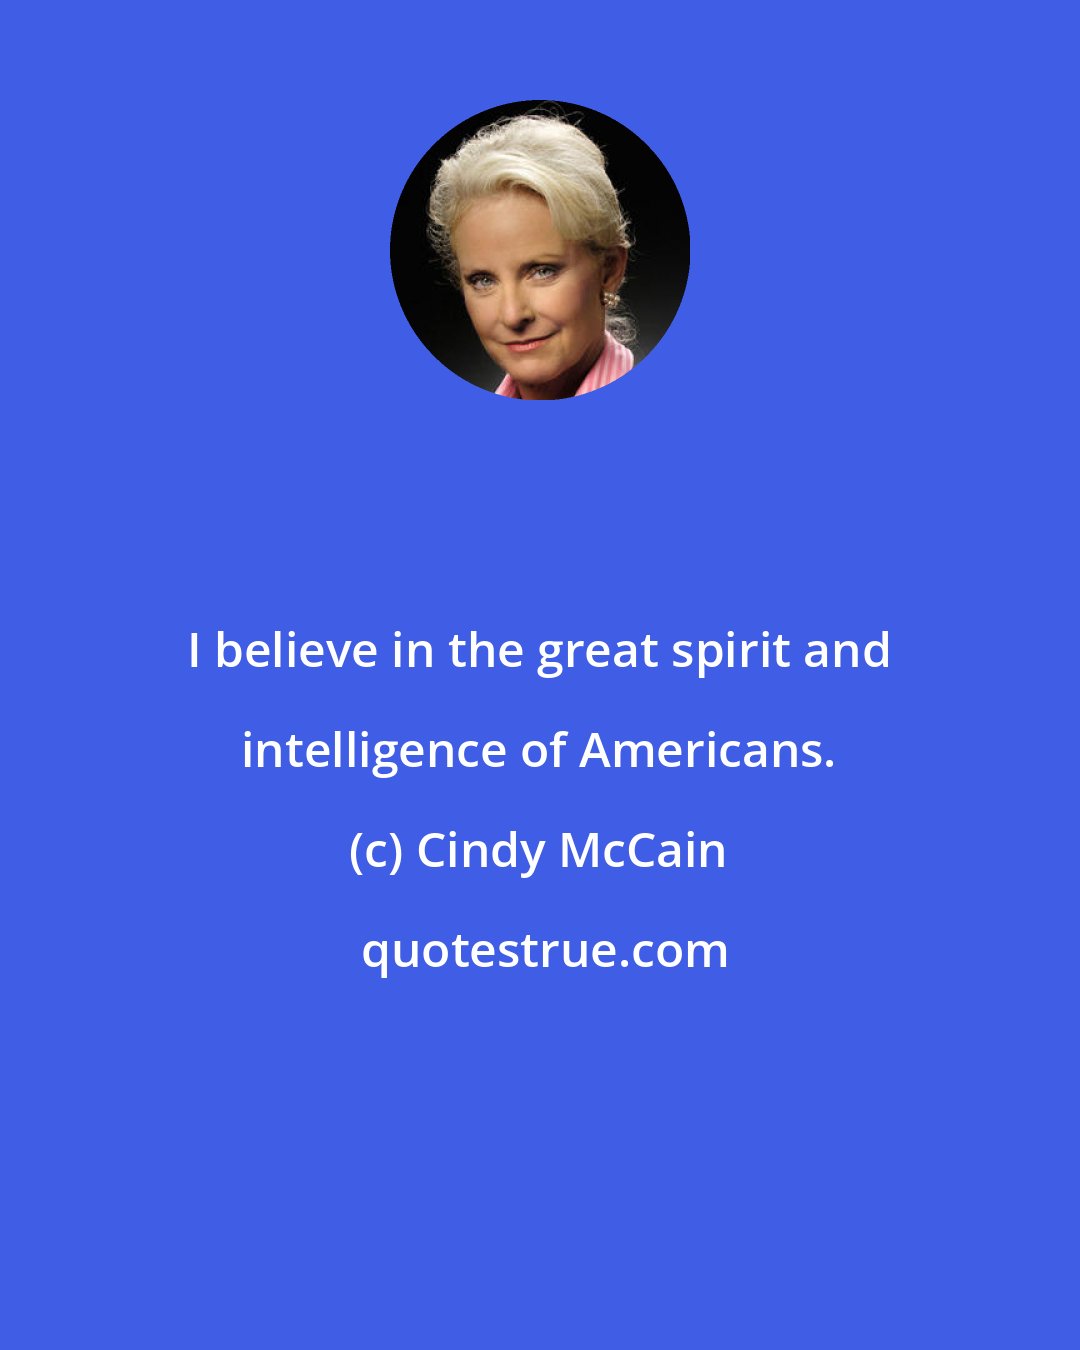 Cindy McCain: I believe in the great spirit and intelligence of Americans.